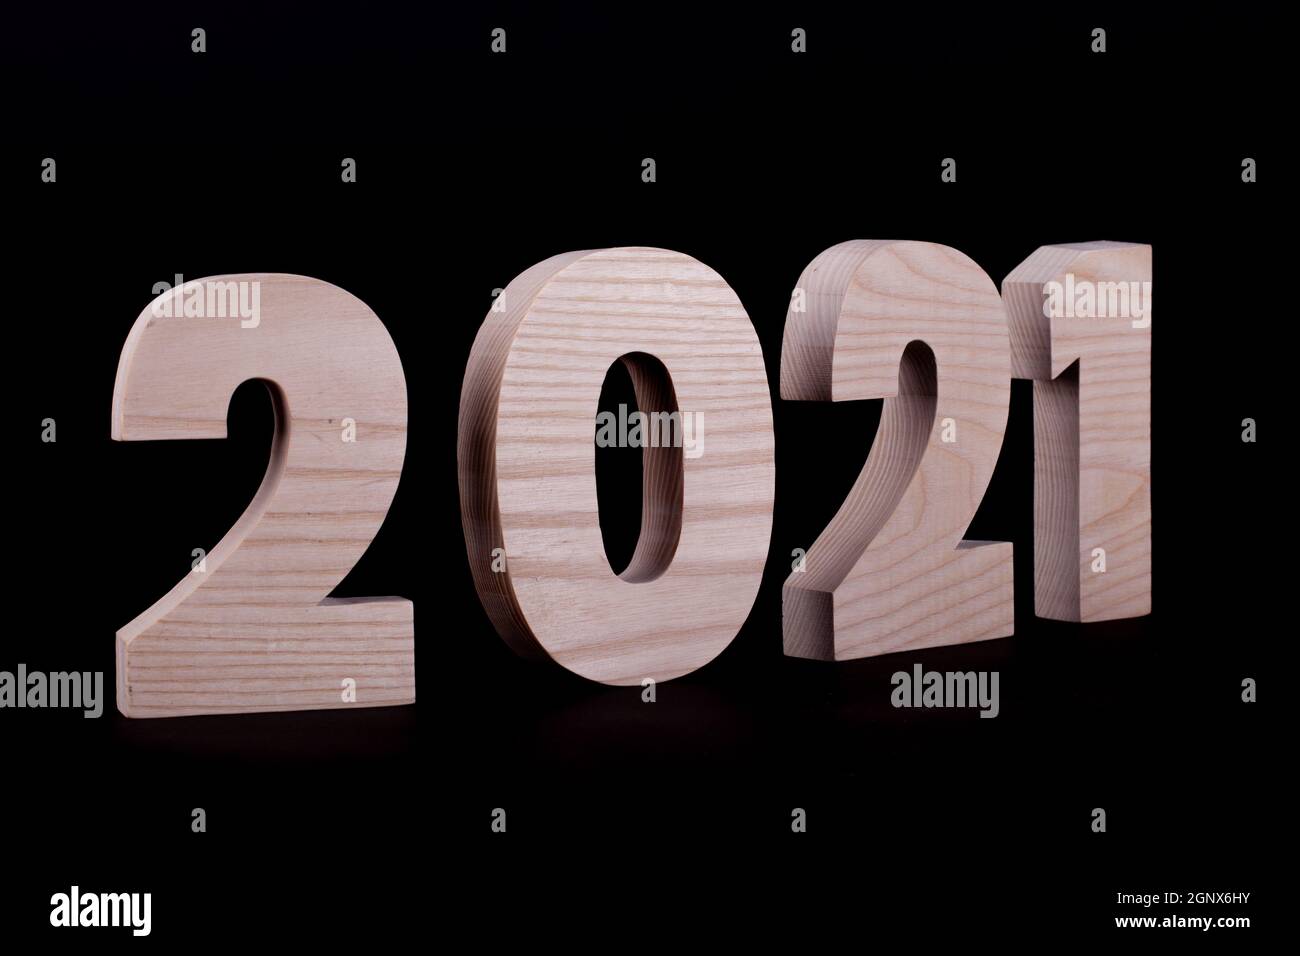 Wooden Numbers 1234567890 Stock Photo 1150662113